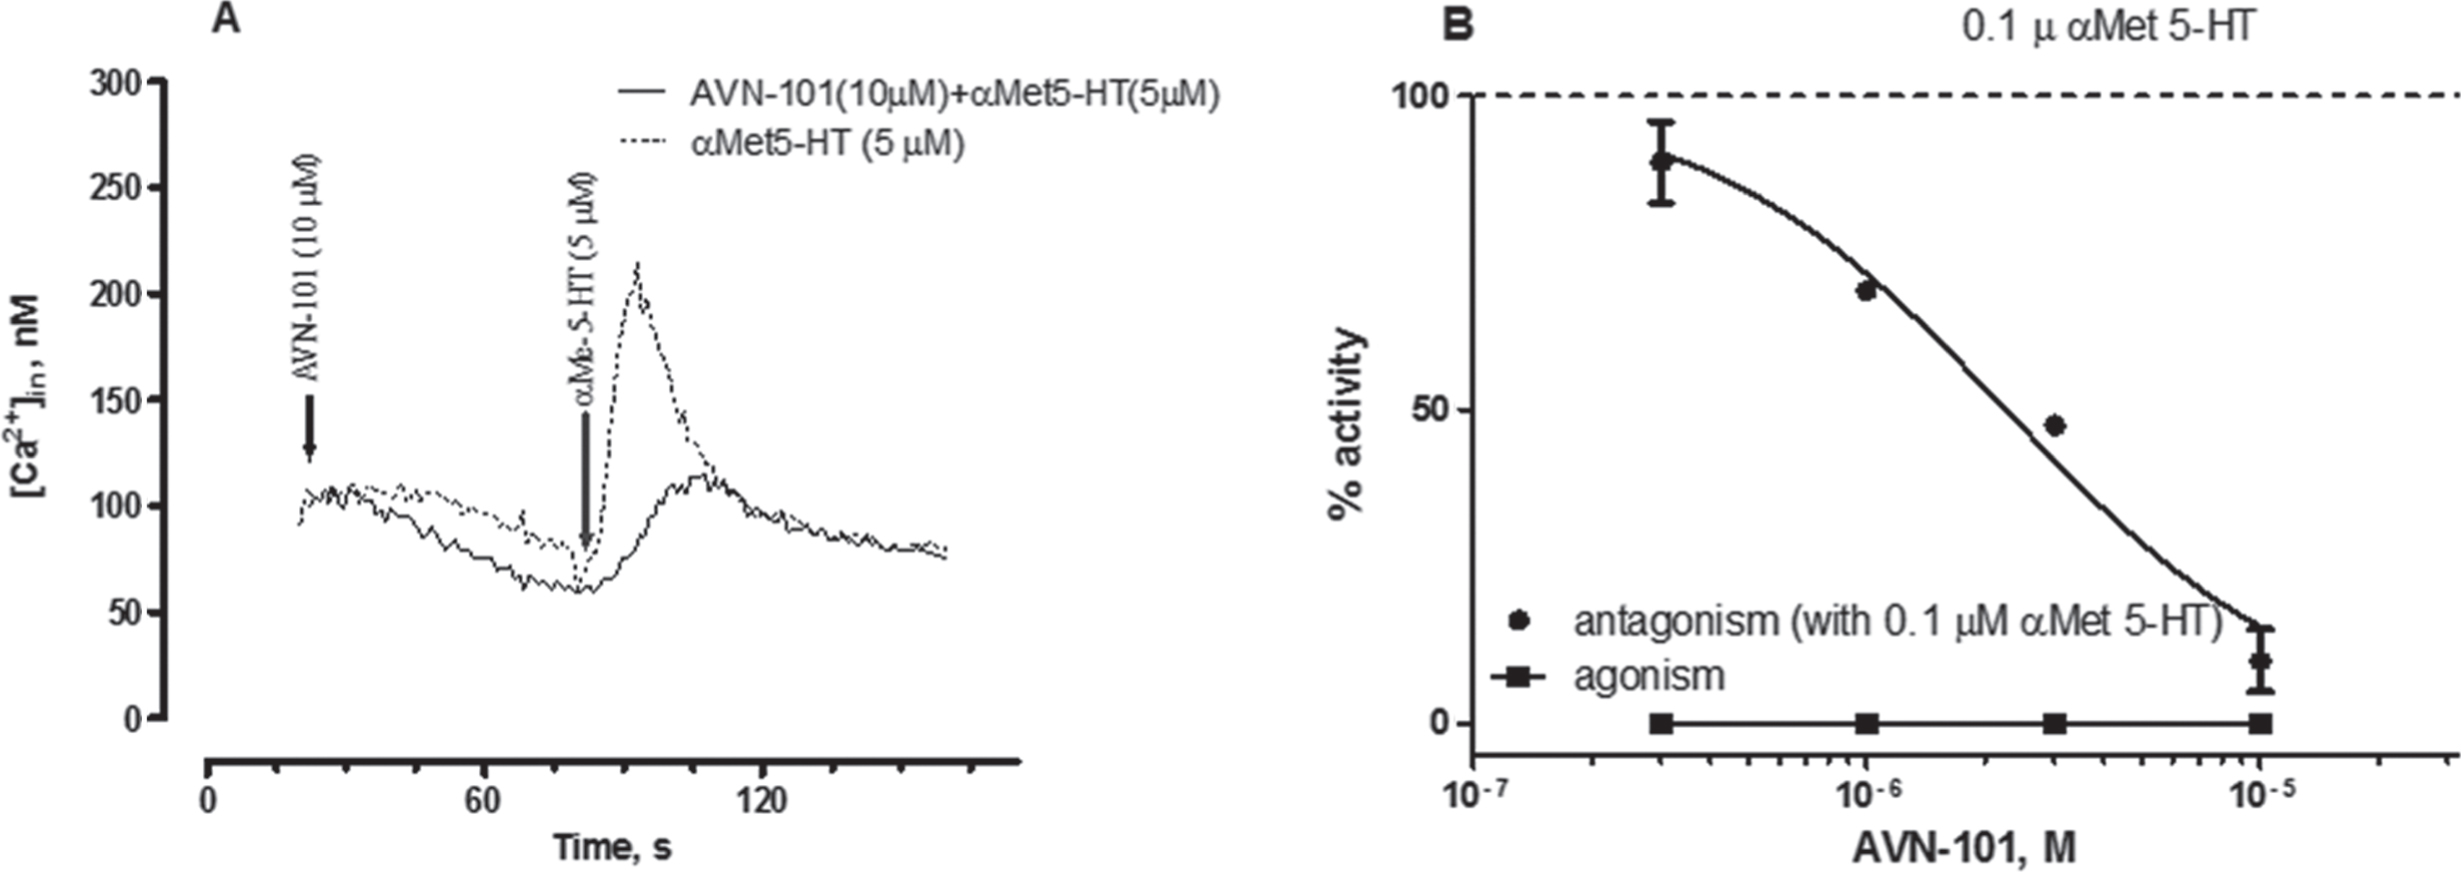 A) Kinetics of Ca2 + mobilization induced by αMet5-HT (5μM) without (dashed line) and in the presence of 10μM AVN-101 (solid line) in HEK 297 cells extragenously expressing the human recombinant 5-HT2B receptor. Arrows indicate additions of the corresponding compounds. B) Activation (squares) and inhibition of the αMet5-HT-induced rat stomach fundus contraction (circles) with AVN-101.